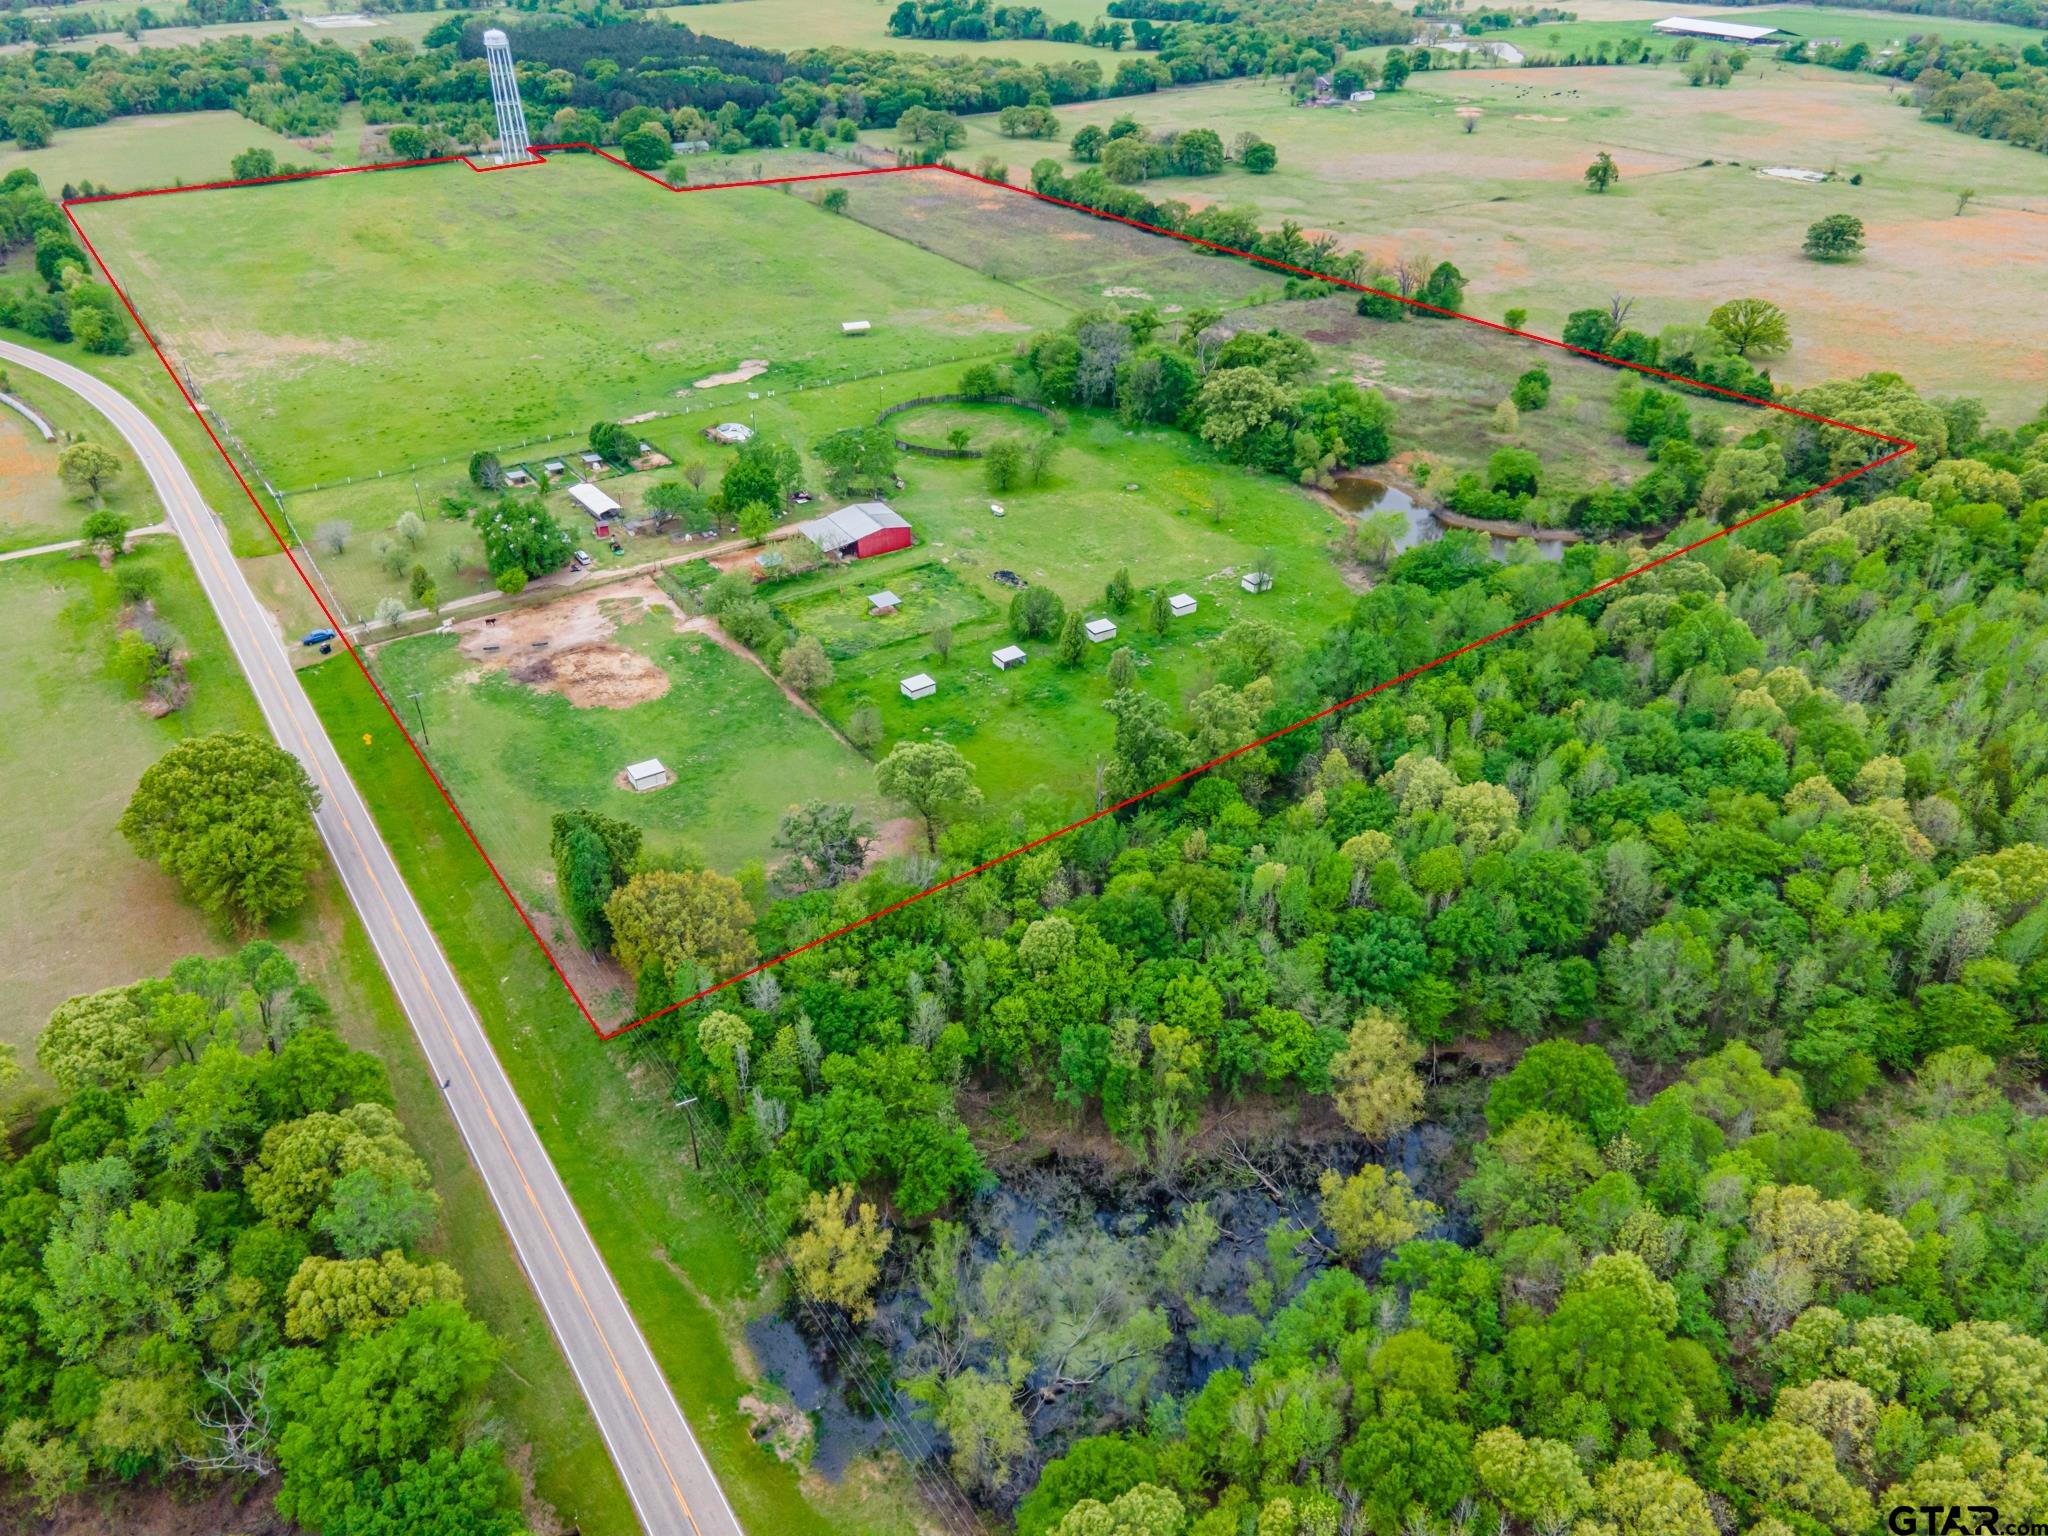 Bring your horses and your dogs! This 50 acre property features a 30 acre irrigated (needs some repair) hay meadow, an additional 8 acre fenced pen, as well as 6 loafing sheds fenced and cross fenced plus pens. A large barn with 2 additional horse or calf pens, 60' training ring and a 150' round arena. Pond stocked with bass, blue gill and catfish. Current use is for dog and horse breeding, only some chain link yards will remain. 3 bedroom 2 bath ranch style home in need of work or build a new home in its place! Road frontage on FM Road and County Road 2436.